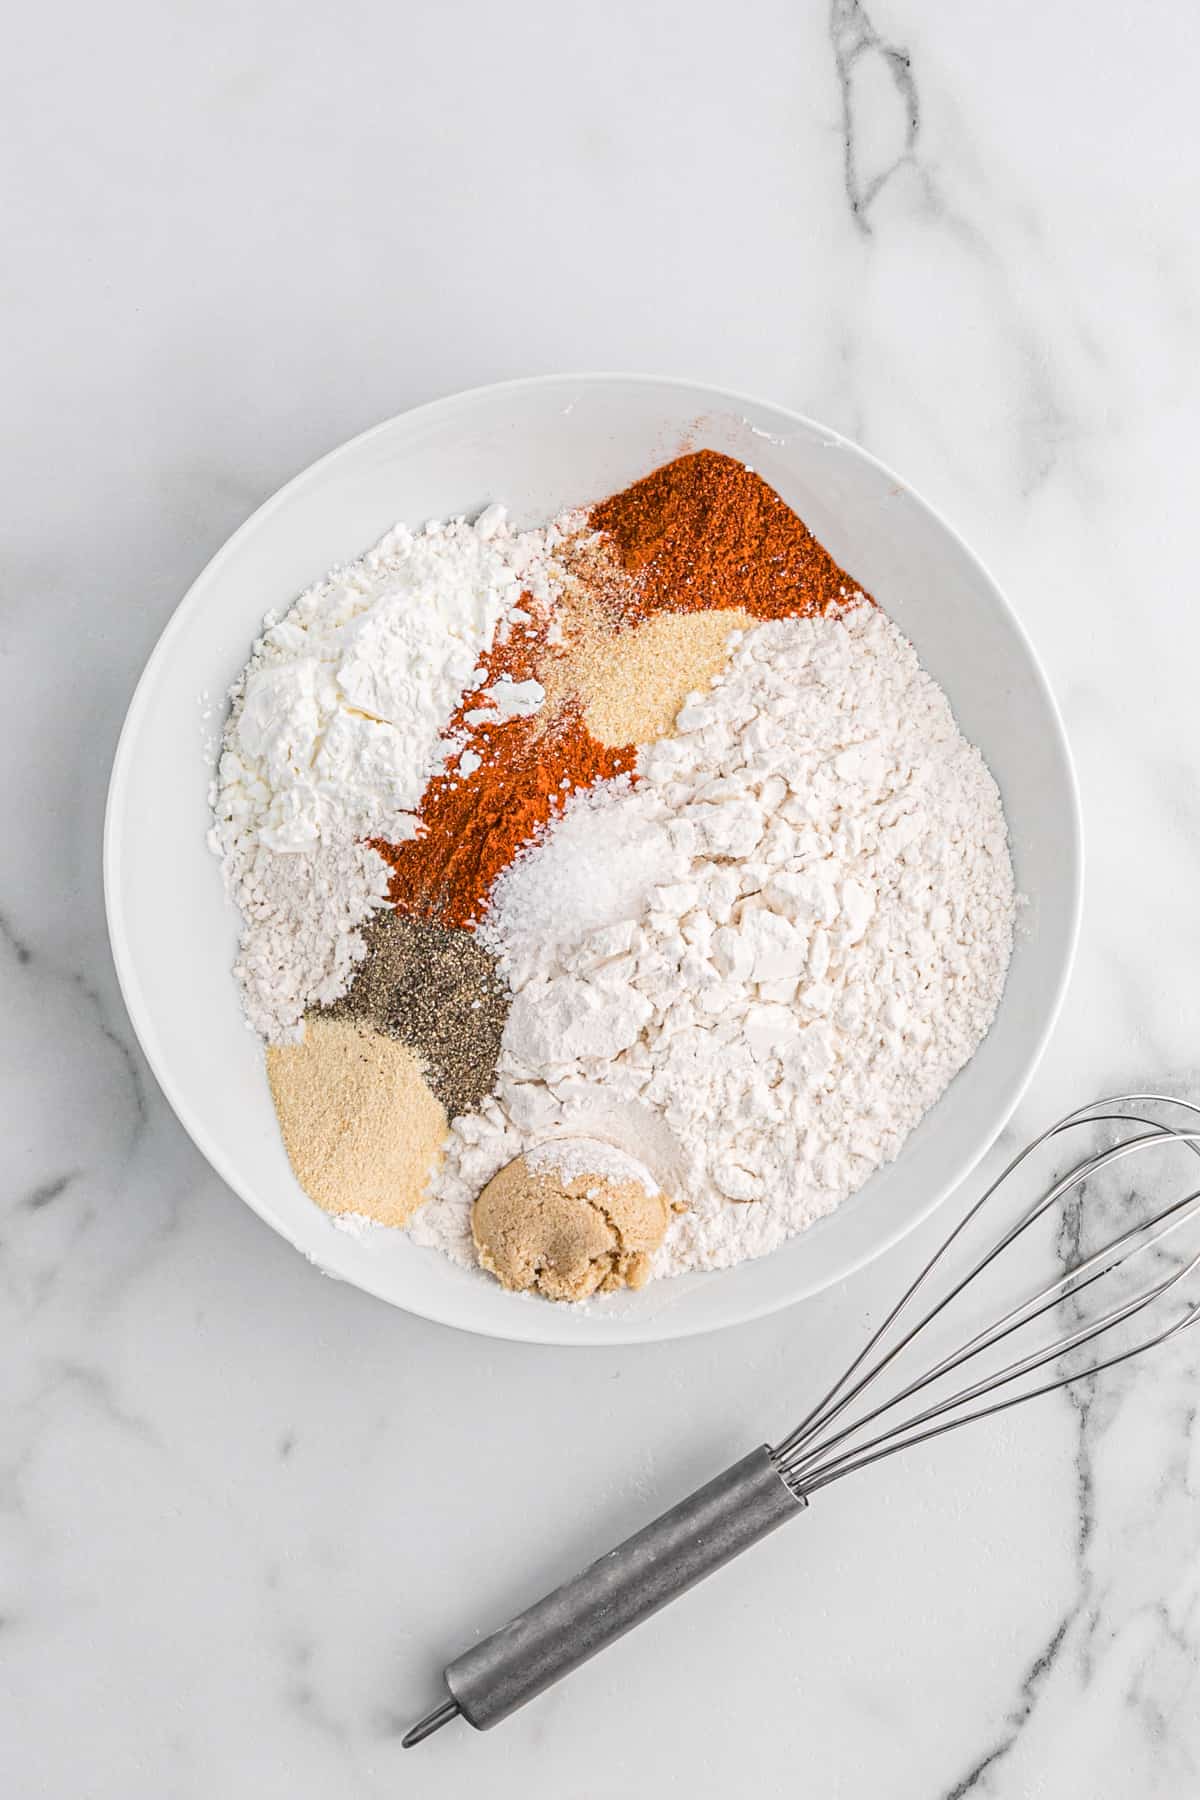 Flour and seasonings in a shallow white bowl.